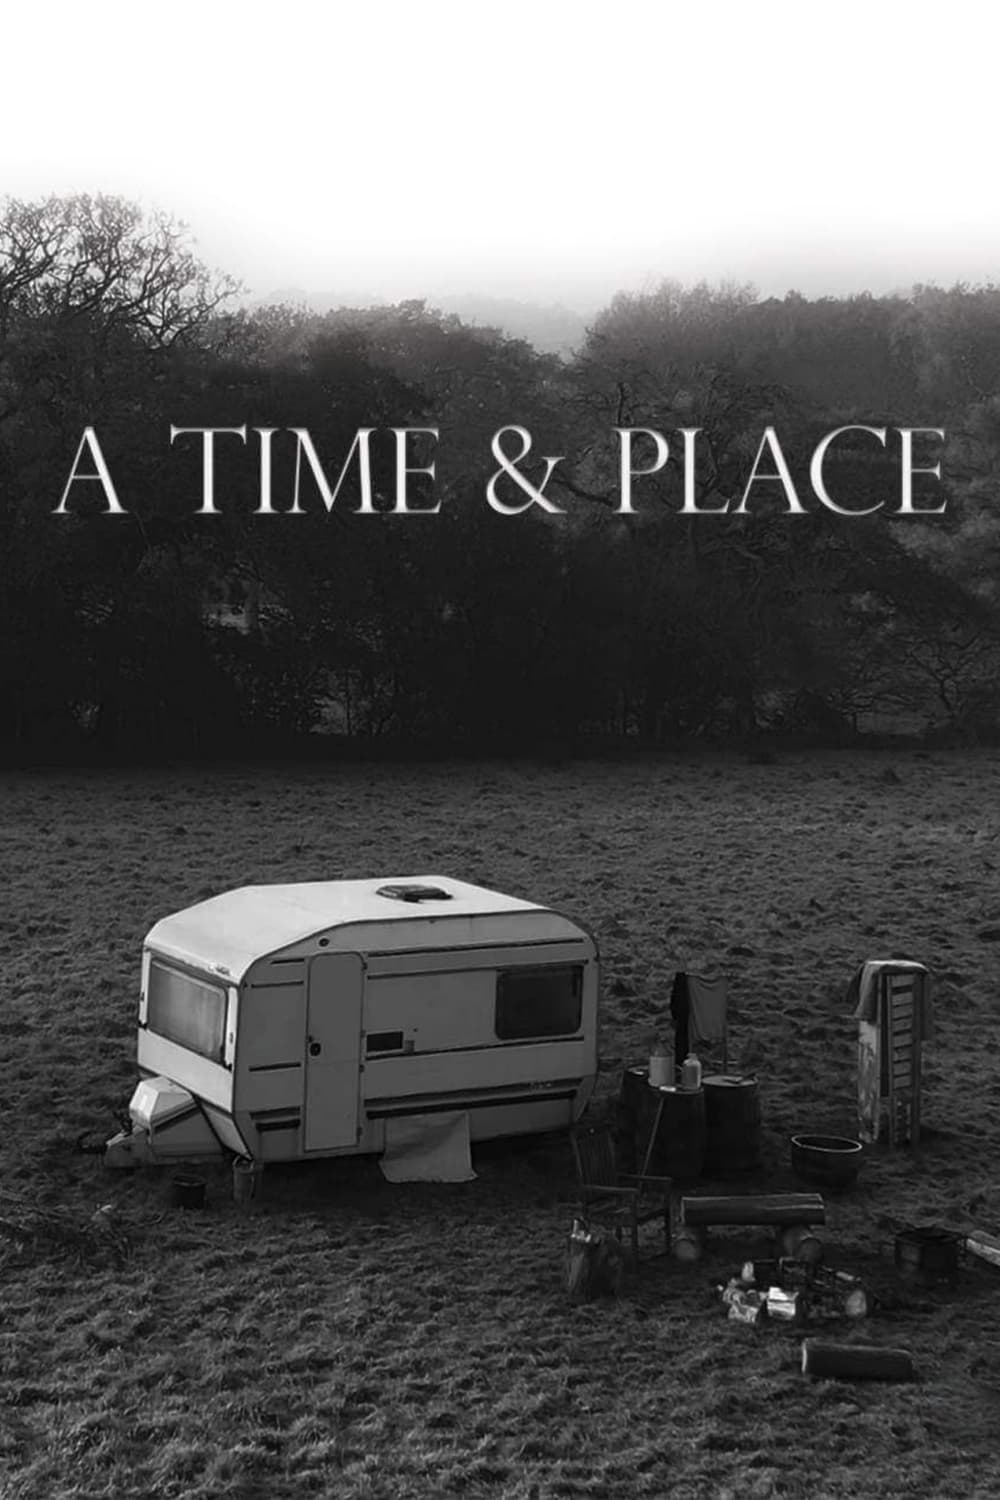 A Time & Place